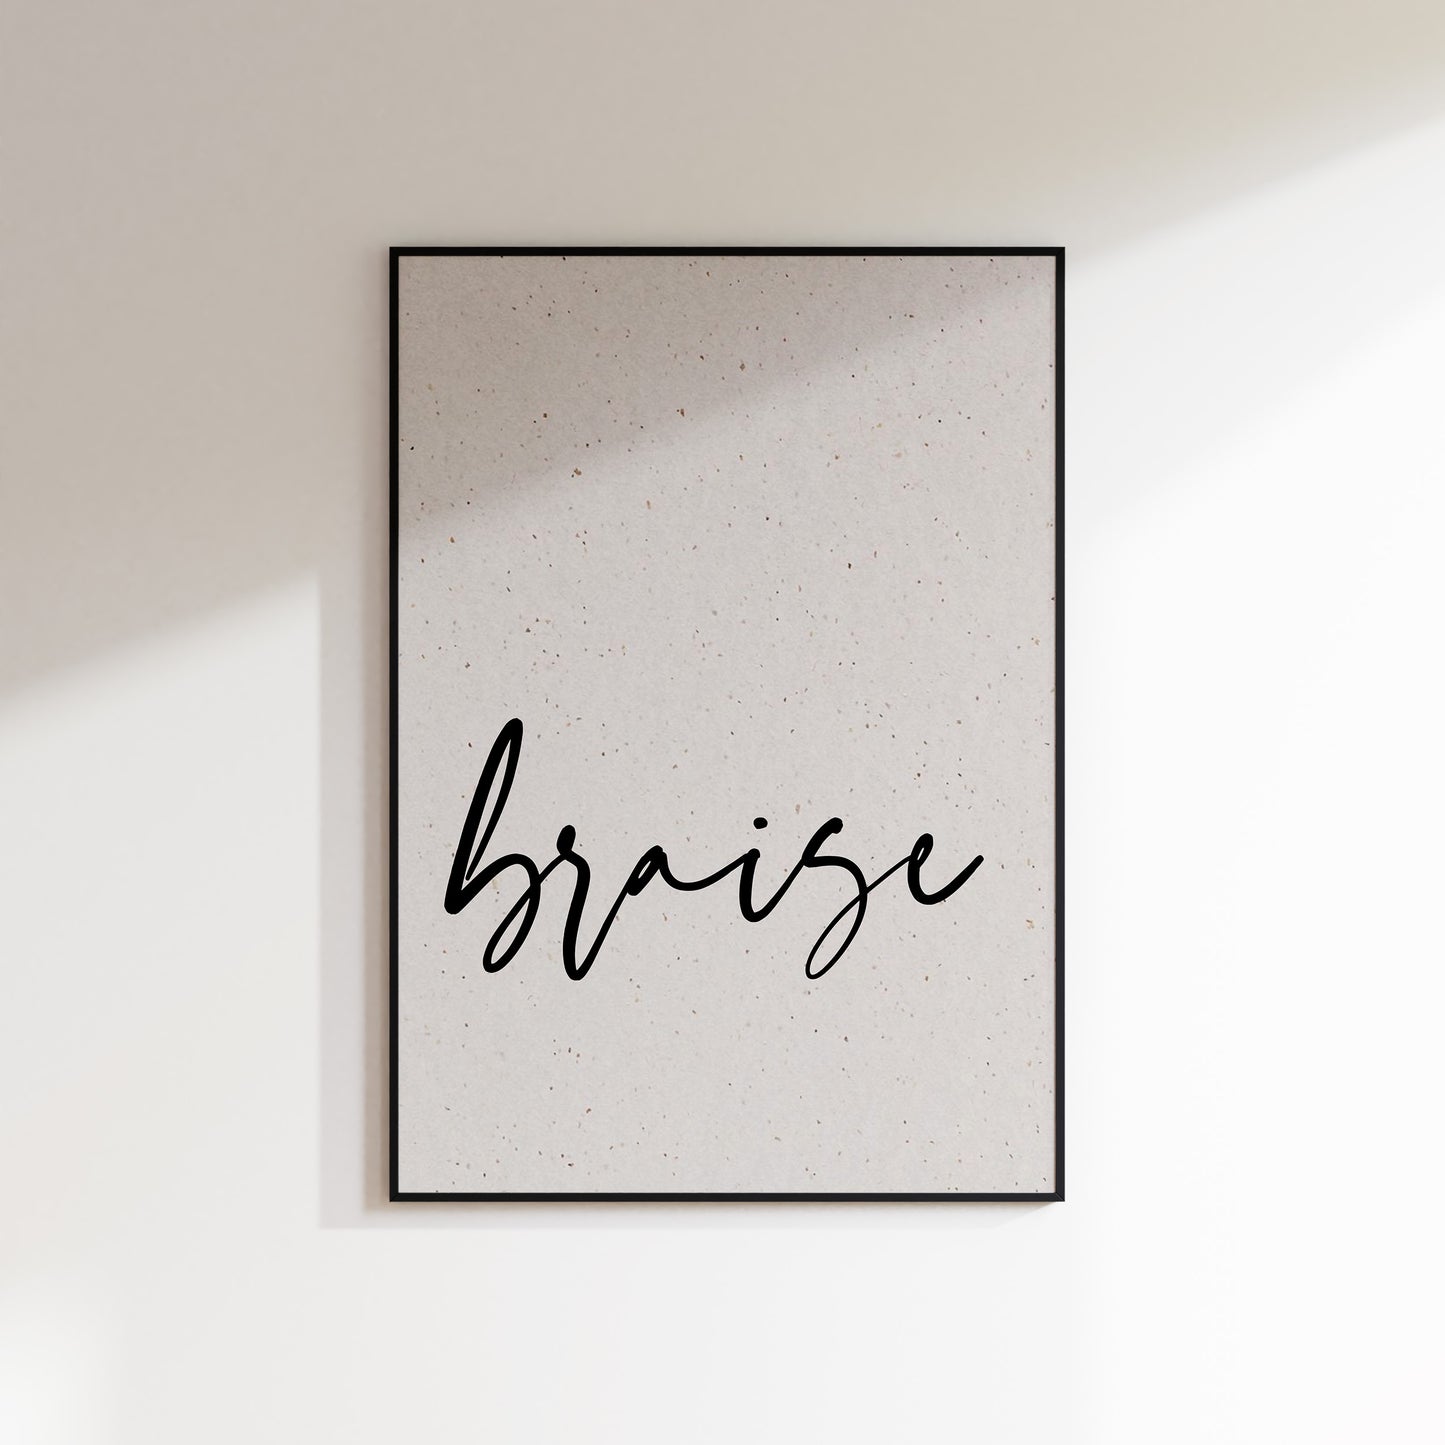 A print on textured paper with black text that reads 'braise' in a handwriting style typeface. A culinary print for the kitchen. Print is in a black frame on a white wall background.